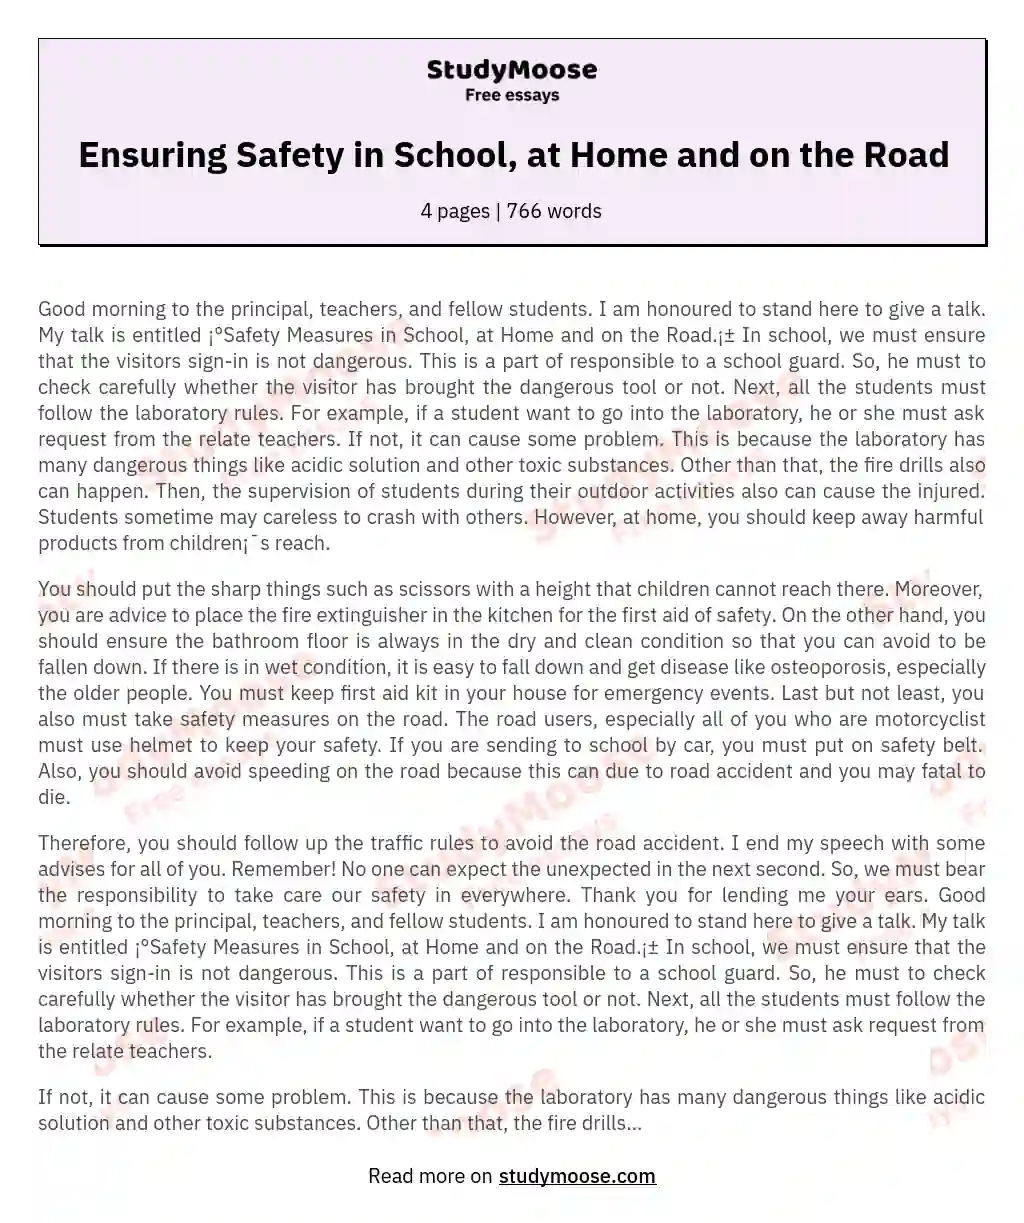 Ensuring Safety in School, at Home and on the Road essay